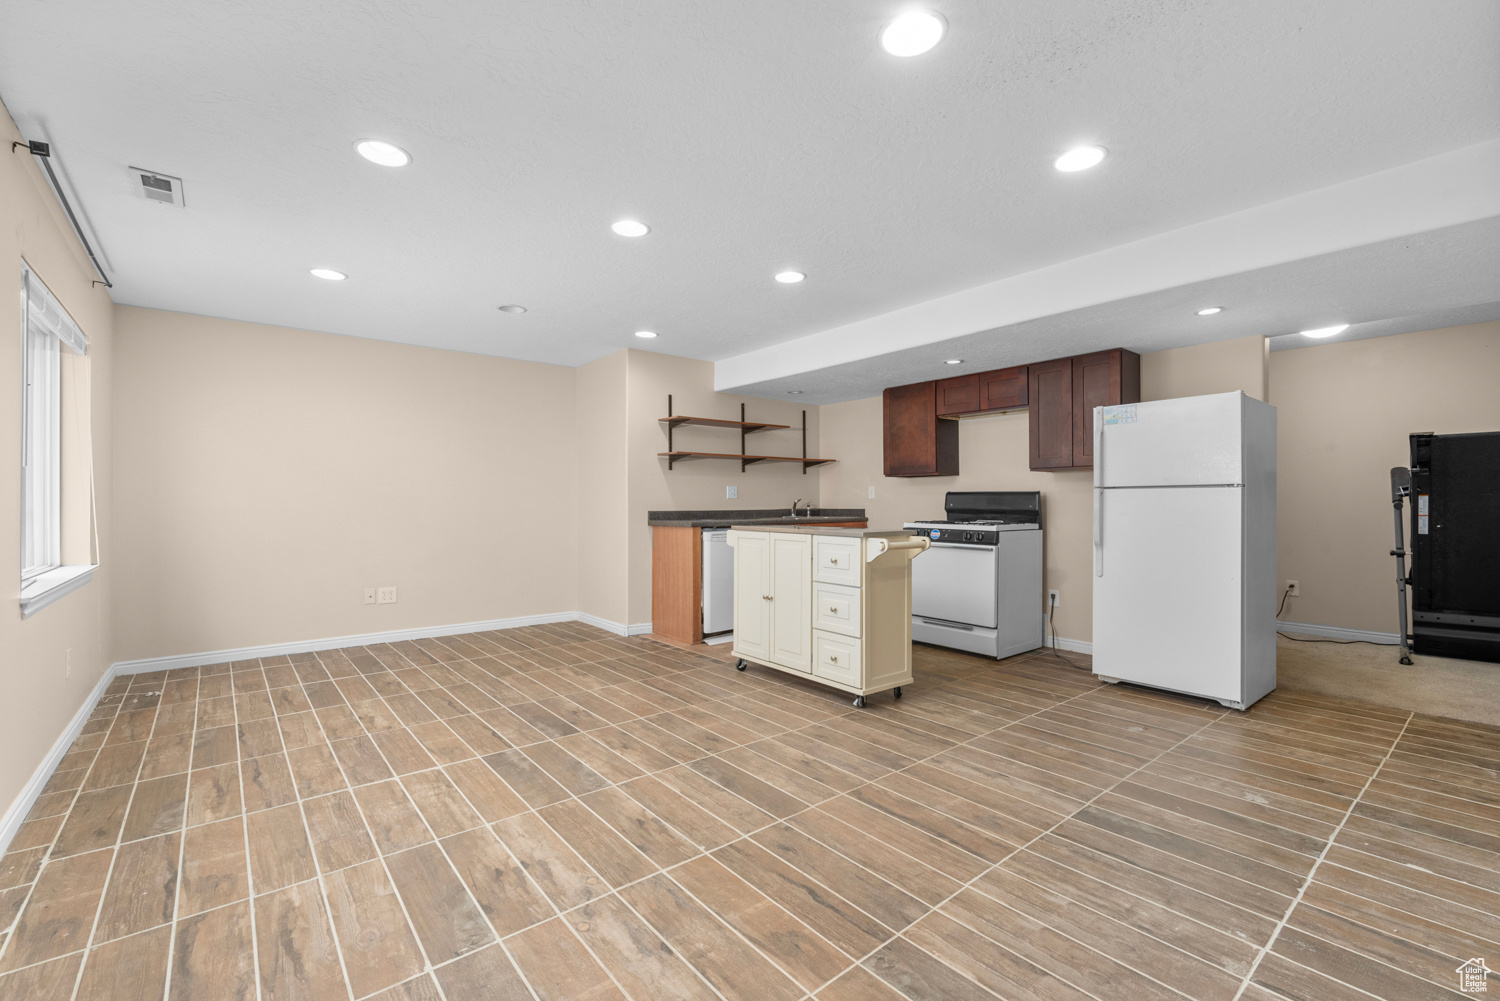 Kitchen with sink, white appliances, and light tile floors